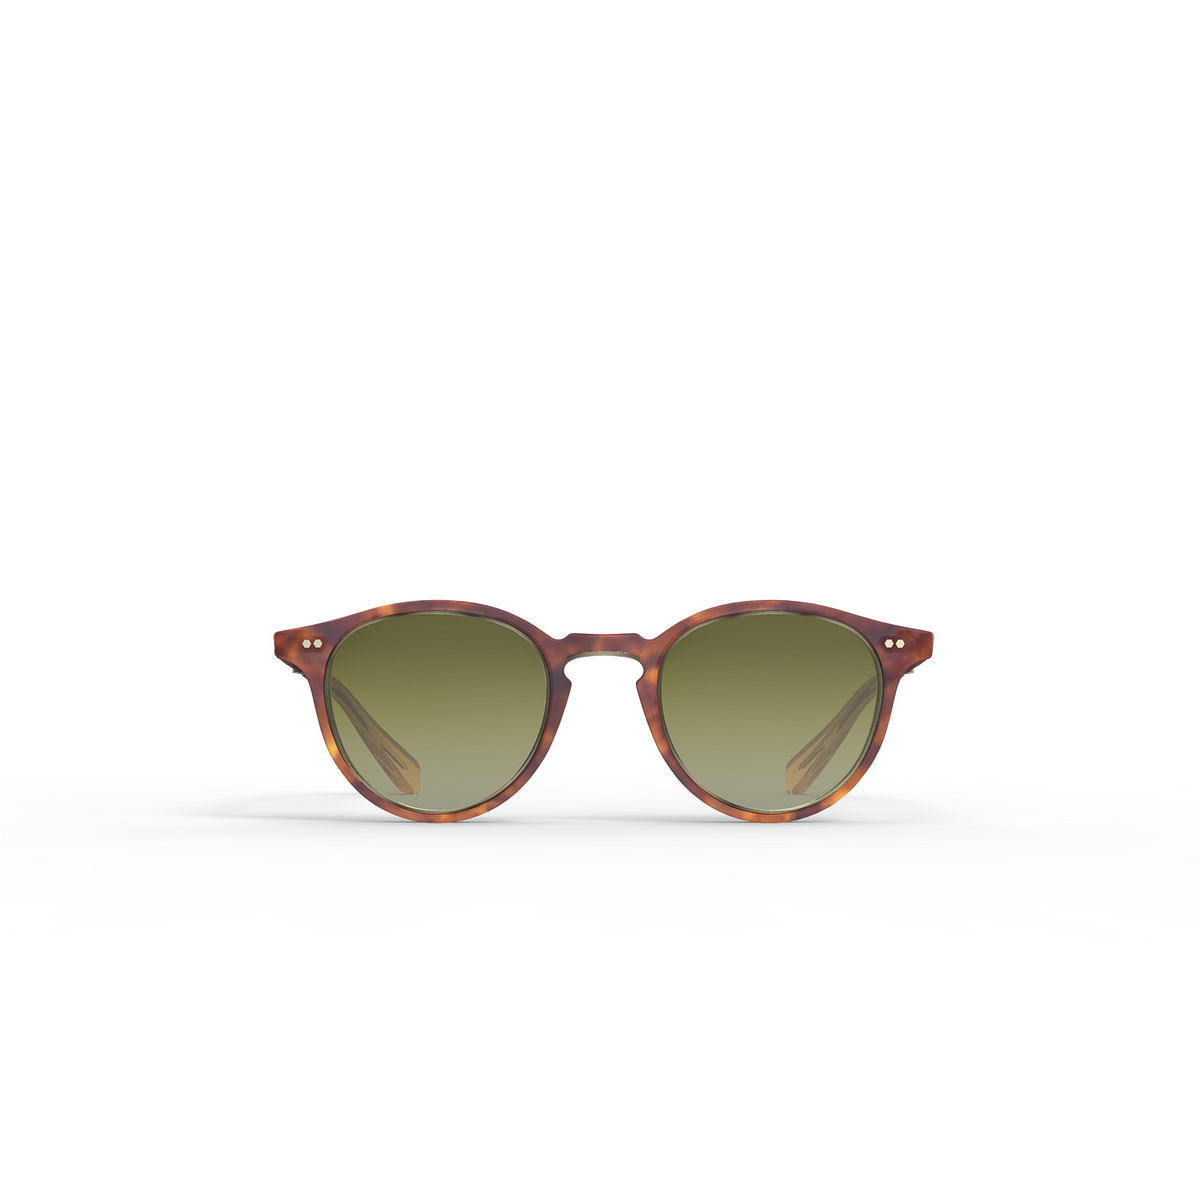 Mr. Leight® Round Sunglasses: Marmont Ii S color Cacao Tortoise-antique Gold/elm Cact-atg/elm - front view.